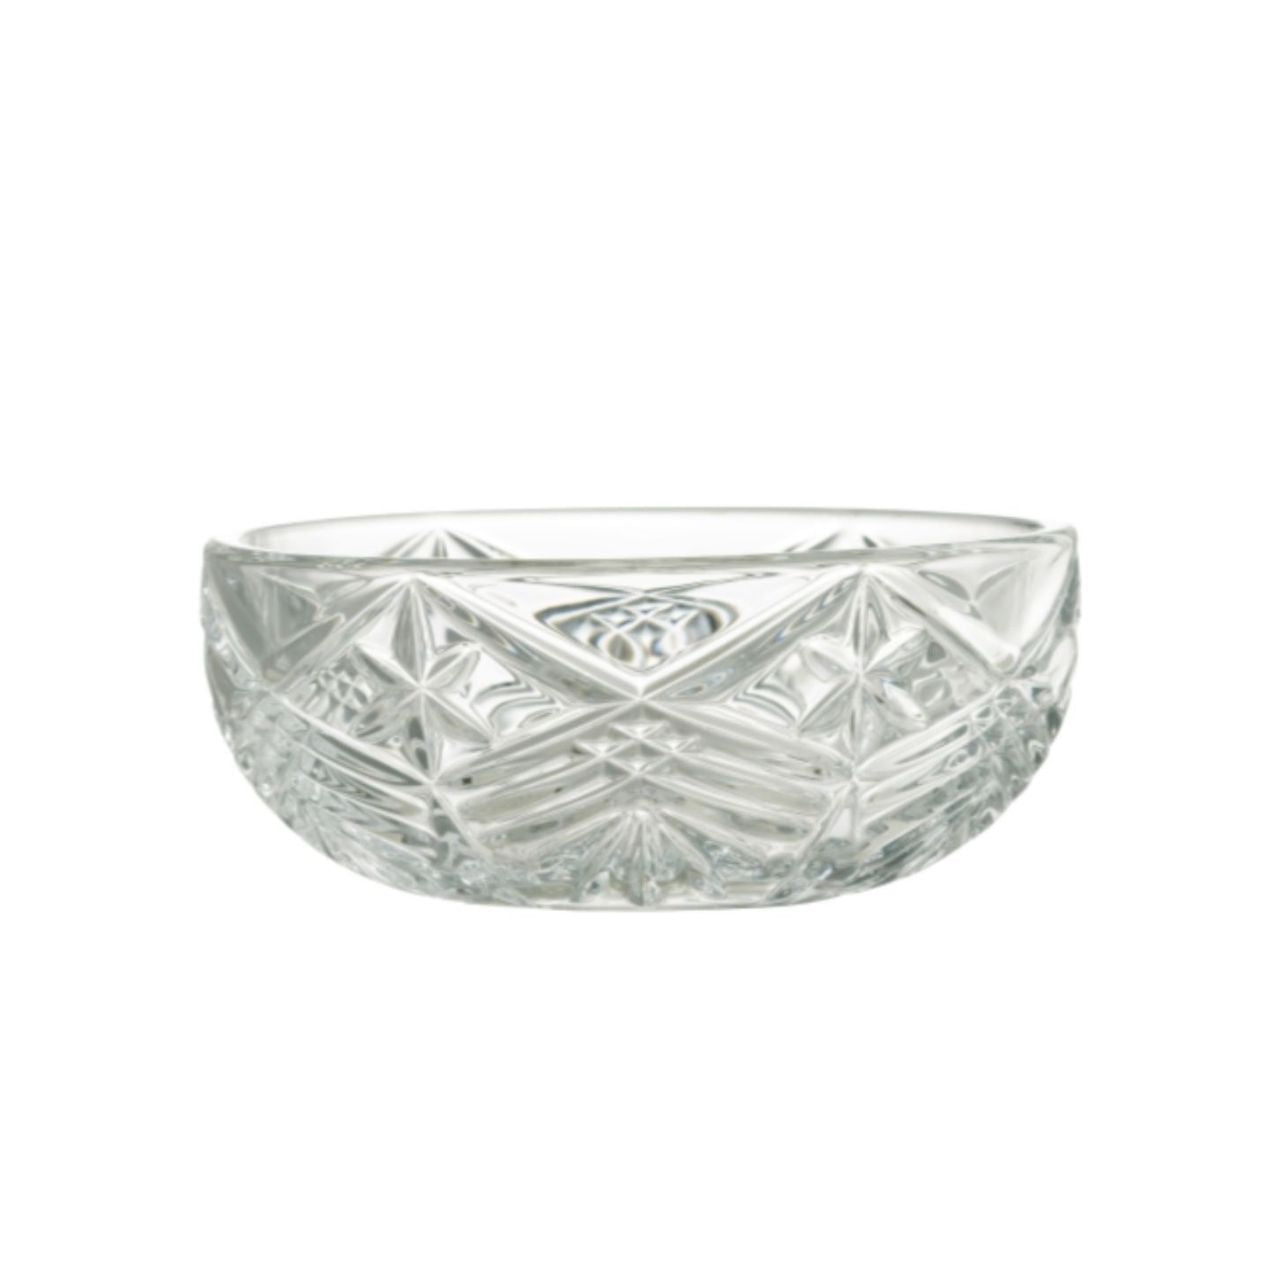 Galway Crystal Symphony 6" Bowl  Galway Crystal Symphony has a unique and beautiful design. It captures light and reflections no matter where it is placed. It makes the perfect Homeware Gift either for someone special or for yourself!